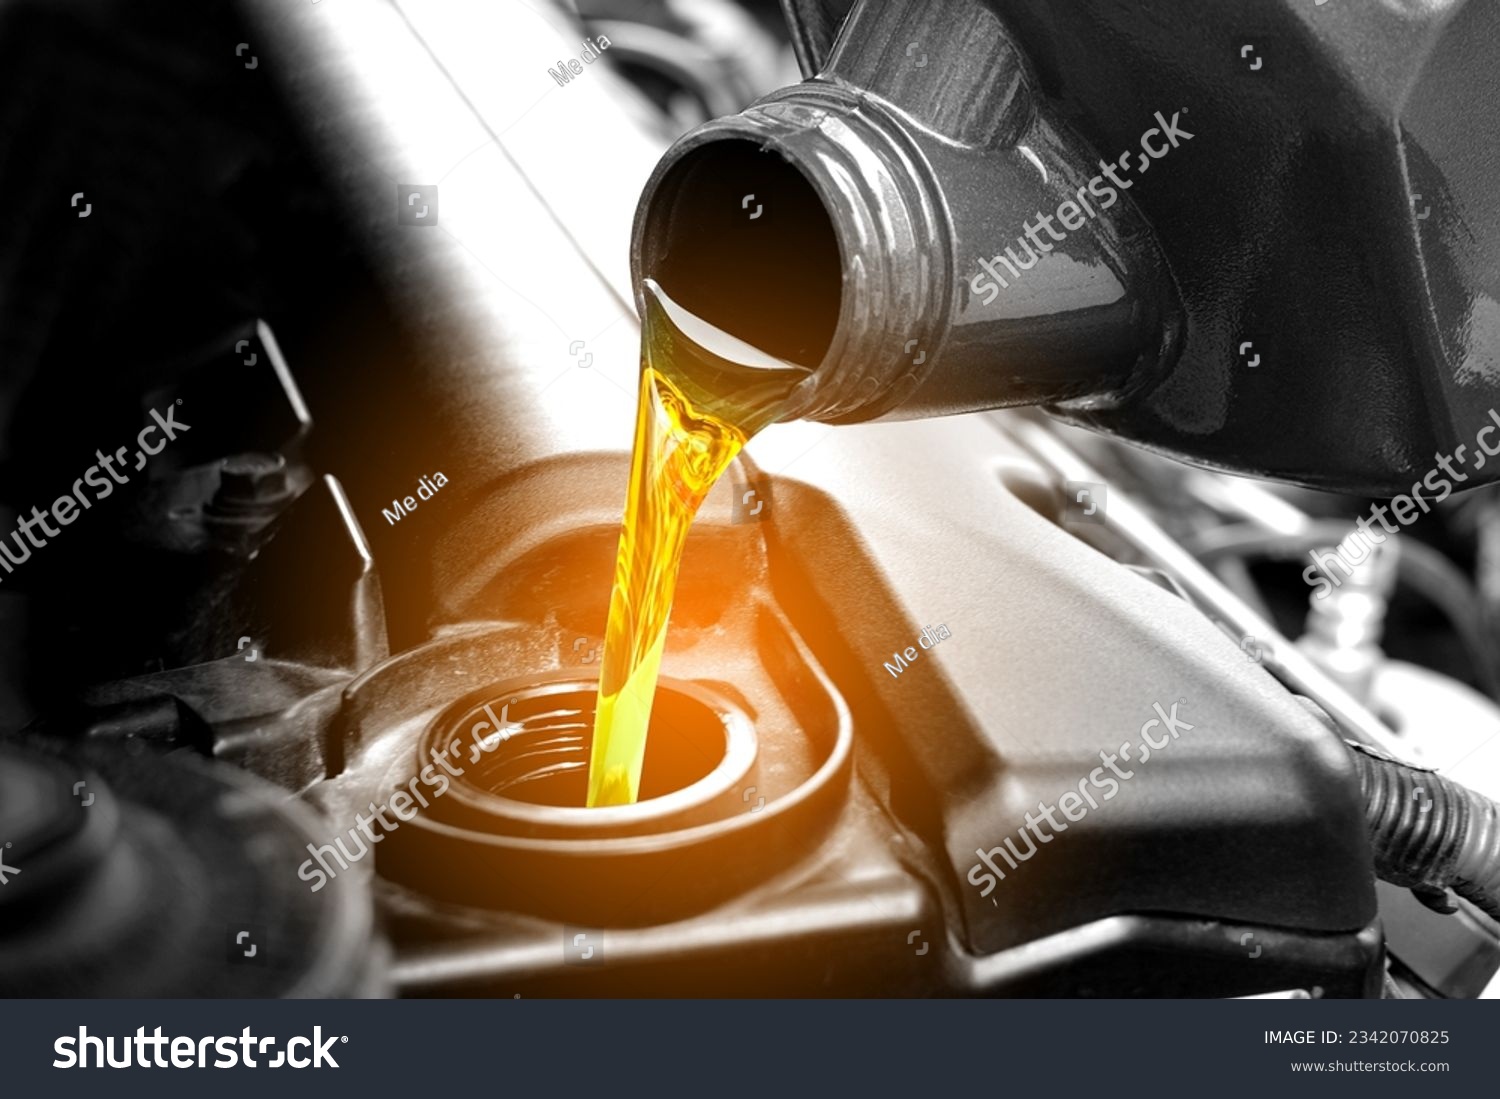 Refueling and pouring oil quality into the engine motor car Transmission and Maintenance Gear .Energy fuel concept. #2342070825